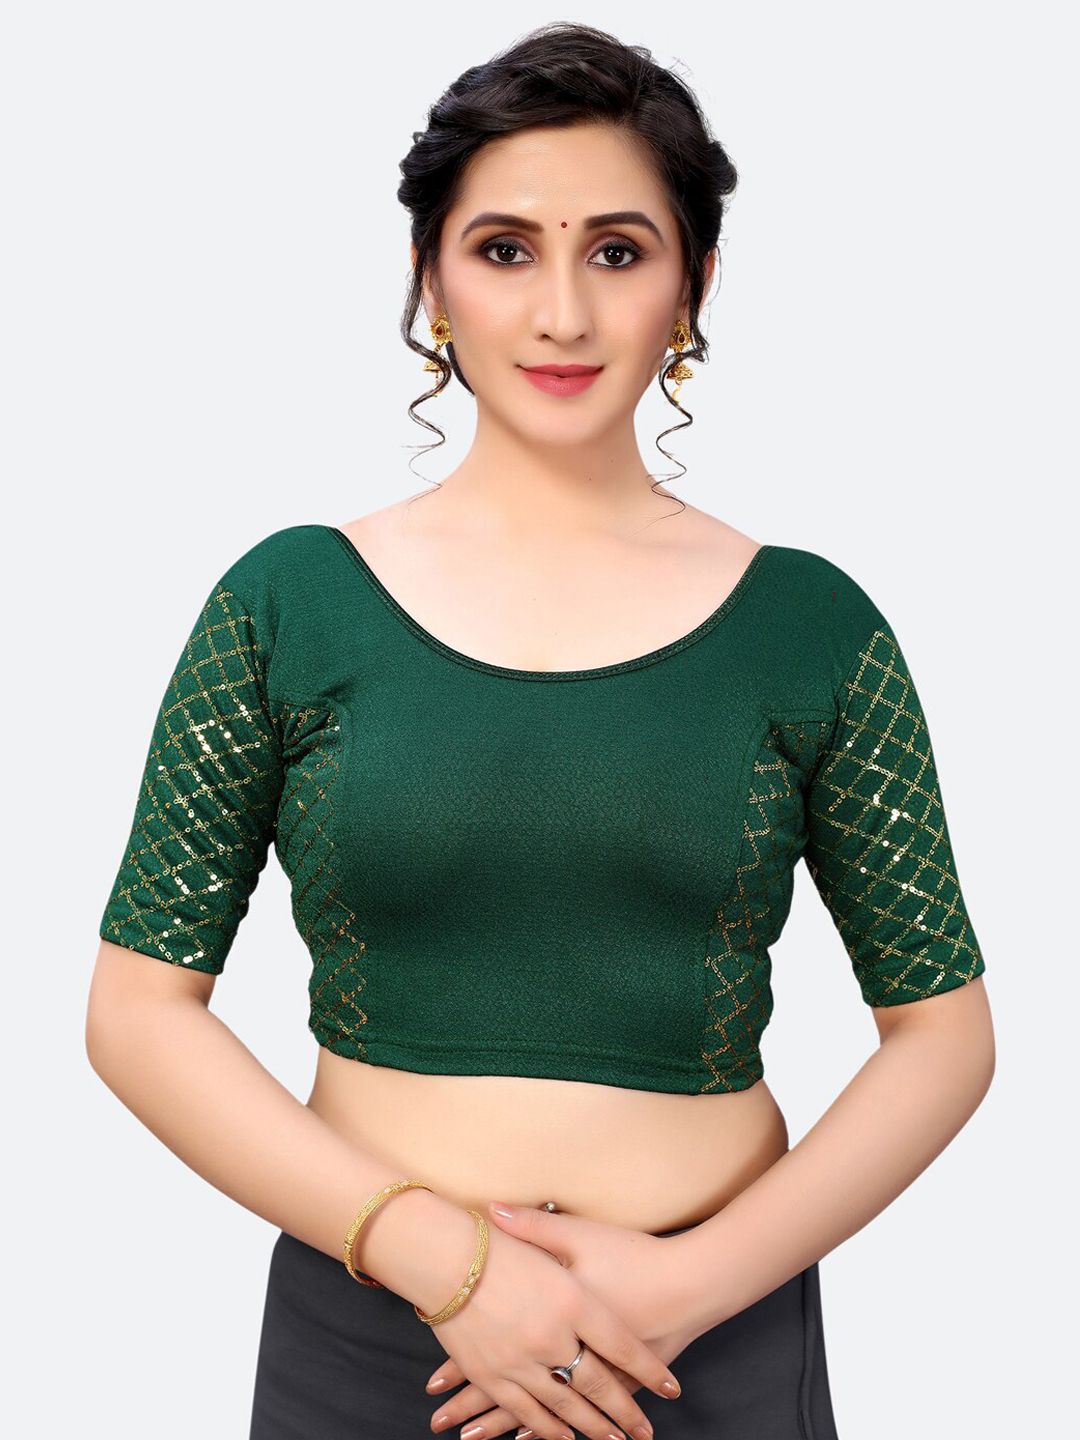 SIRIL Green Embellished Saree Blouse Price in India